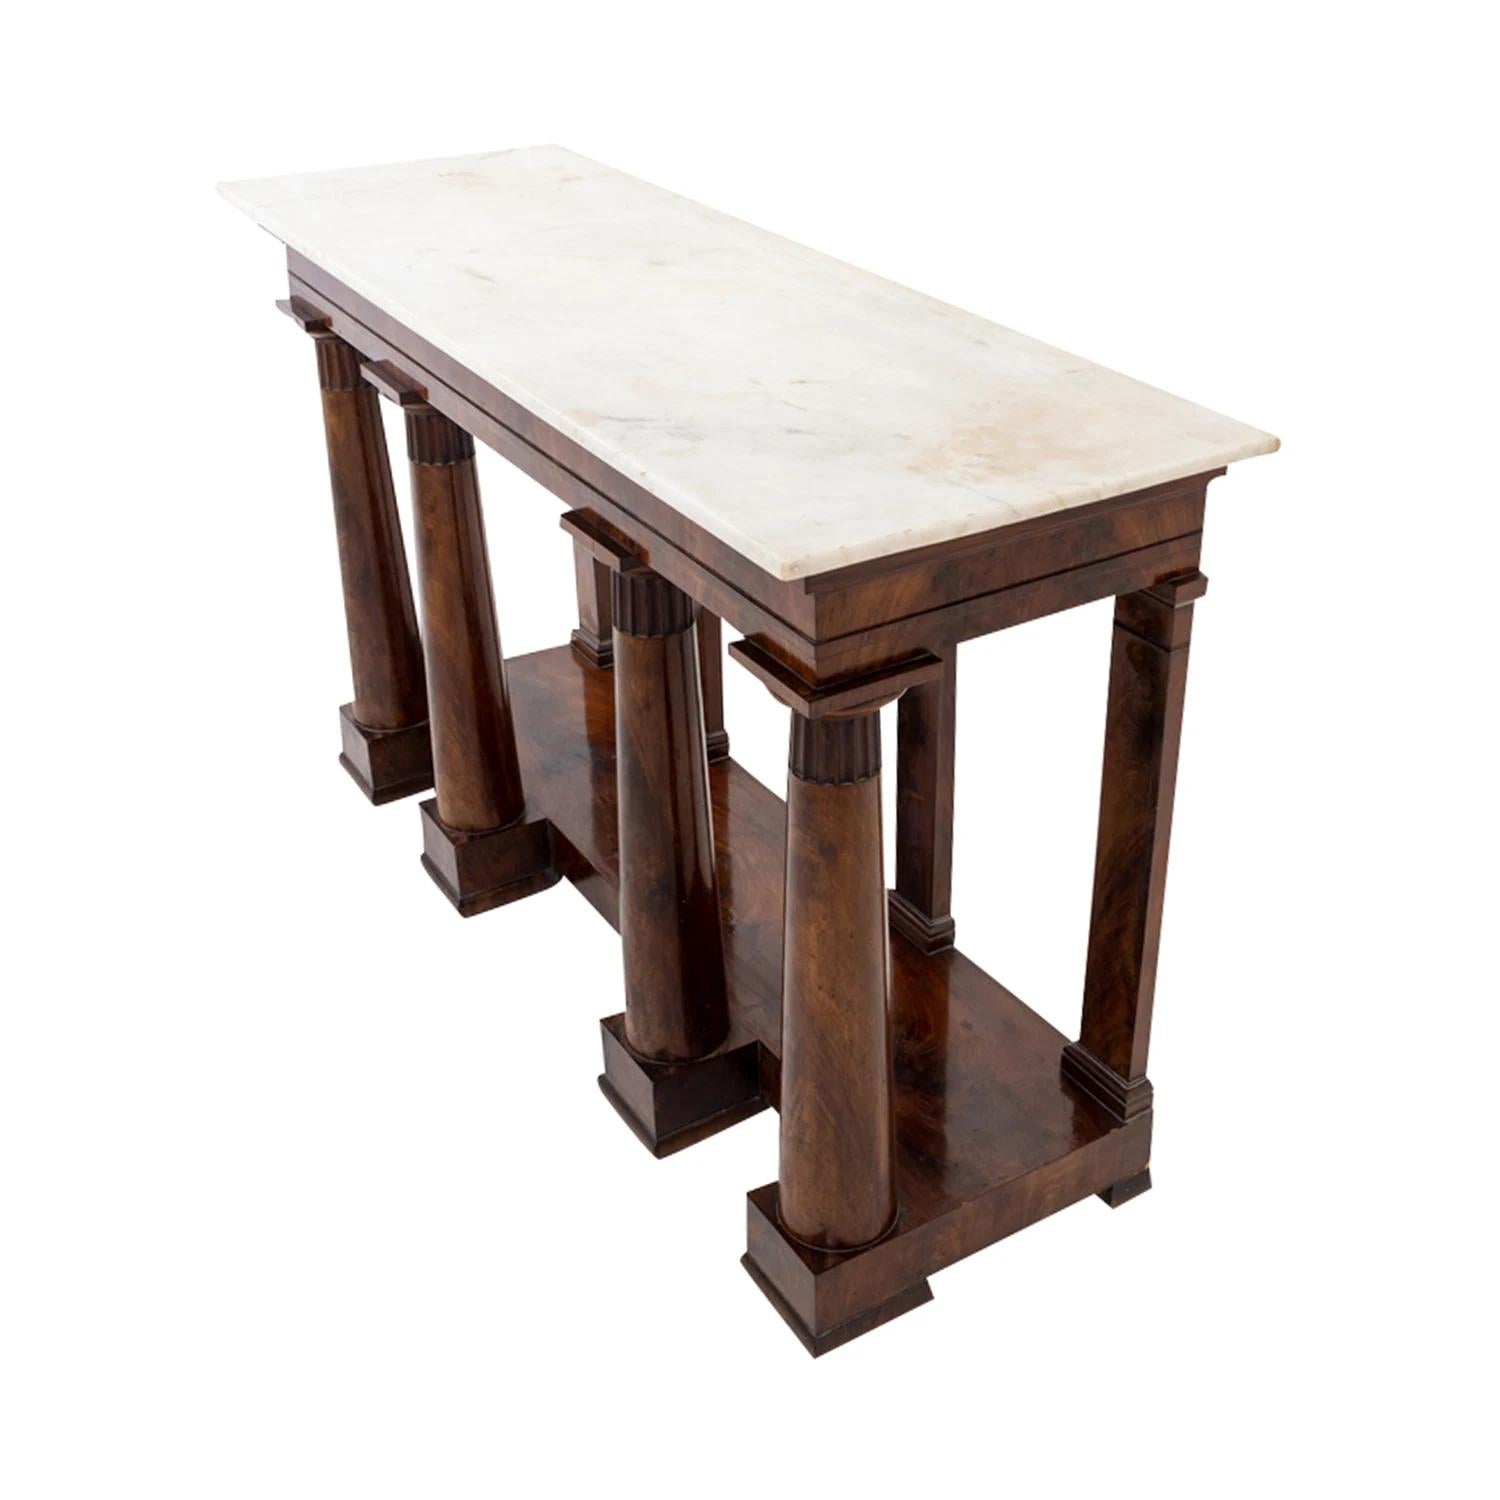 Hand-Carved 19th Century Italian Freestanding Mahogany Center Table - Antique Console Table For Sale